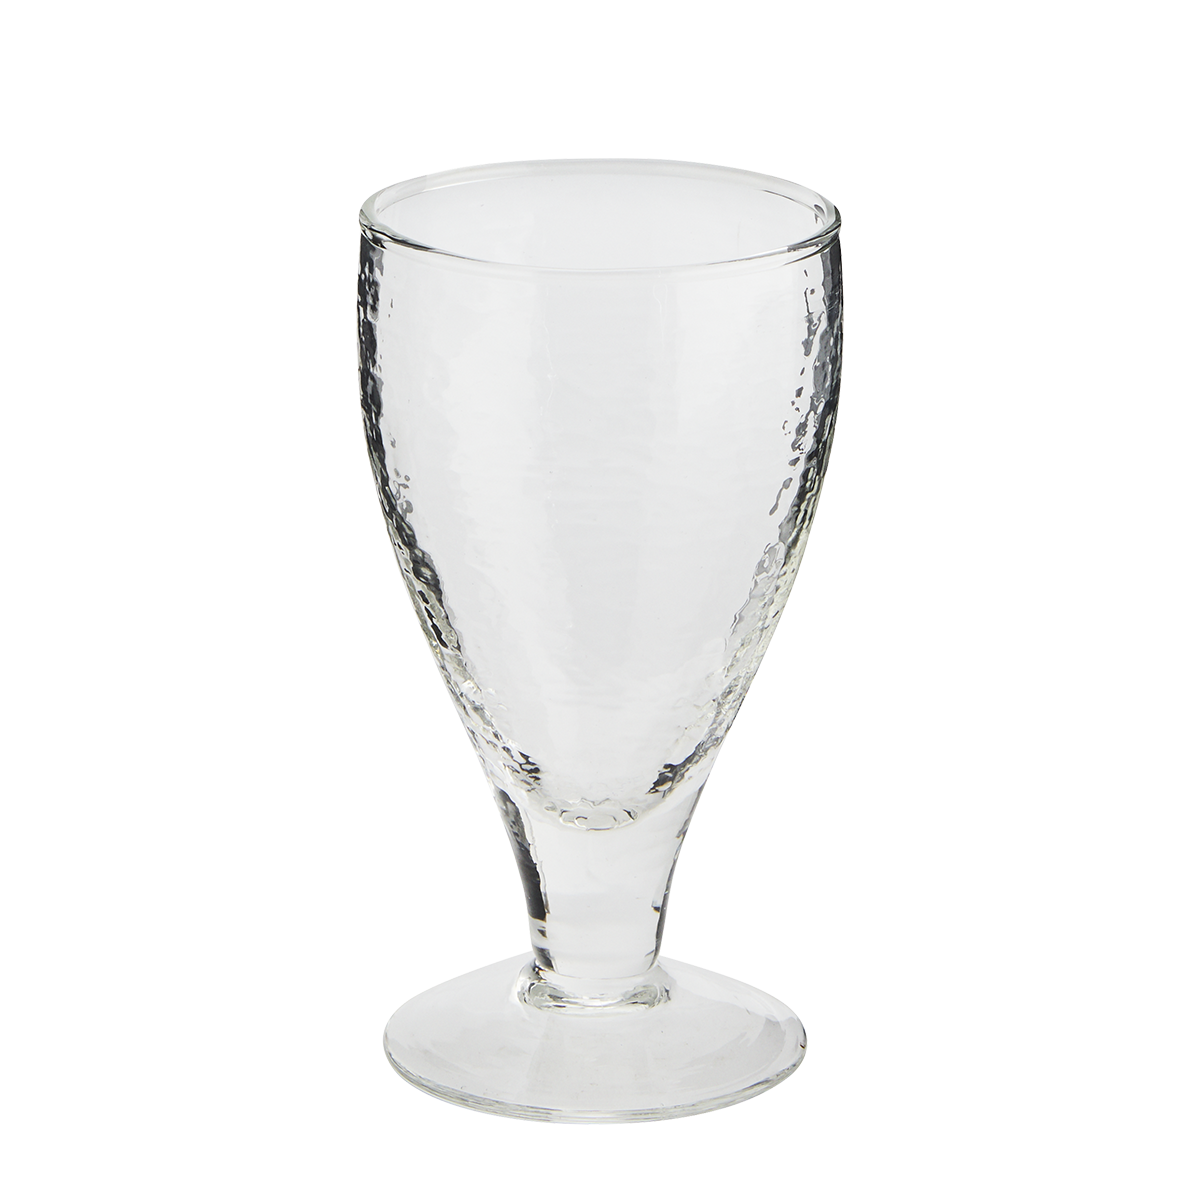 Hammered drinking glass